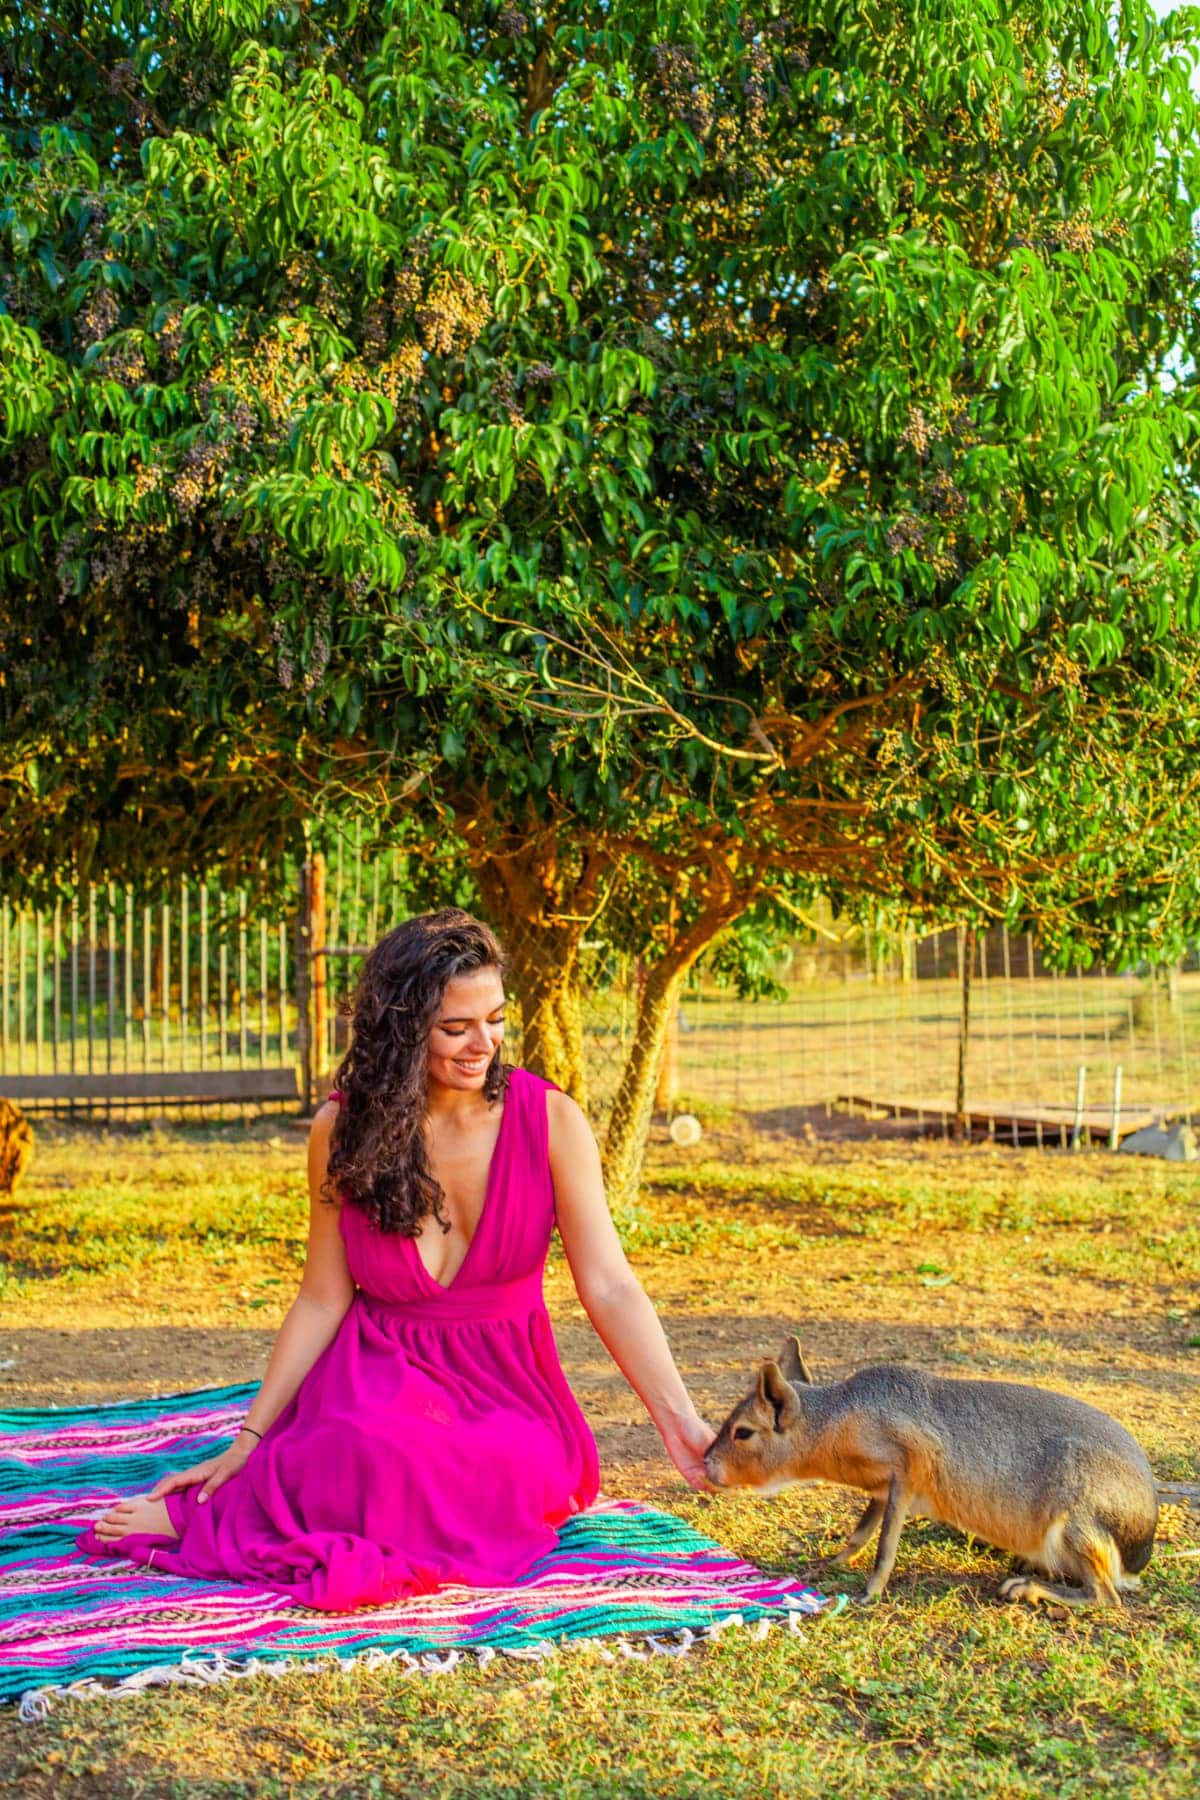 A woman sitting on the ground with an animal